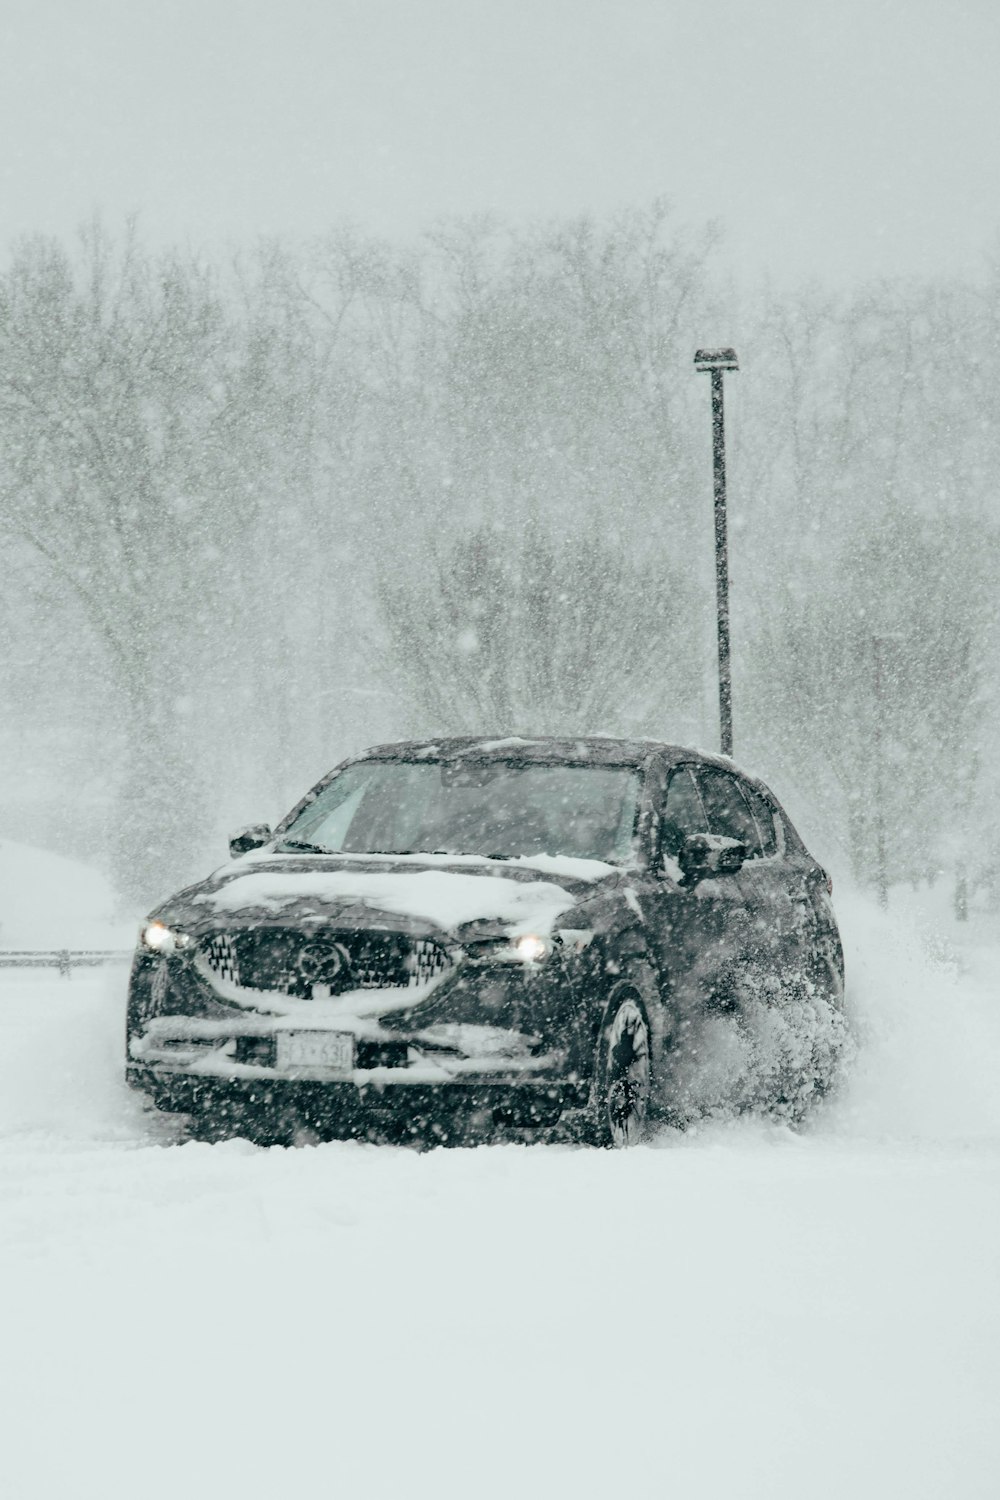 a car driving down a snow covered road